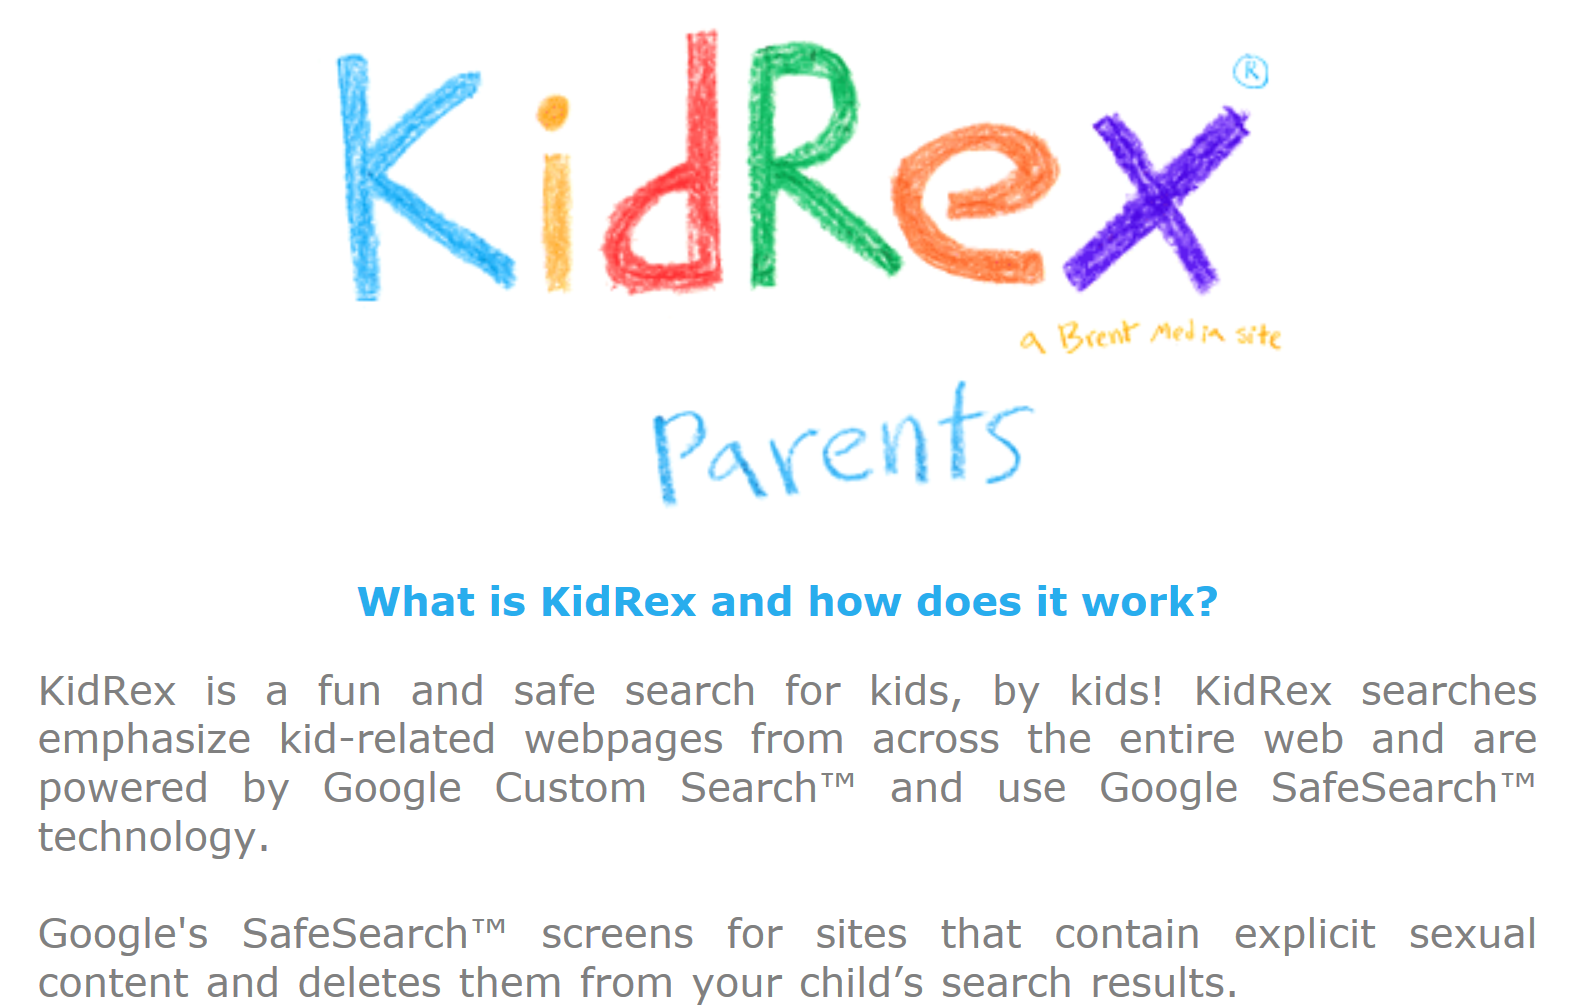 google search engine for kids